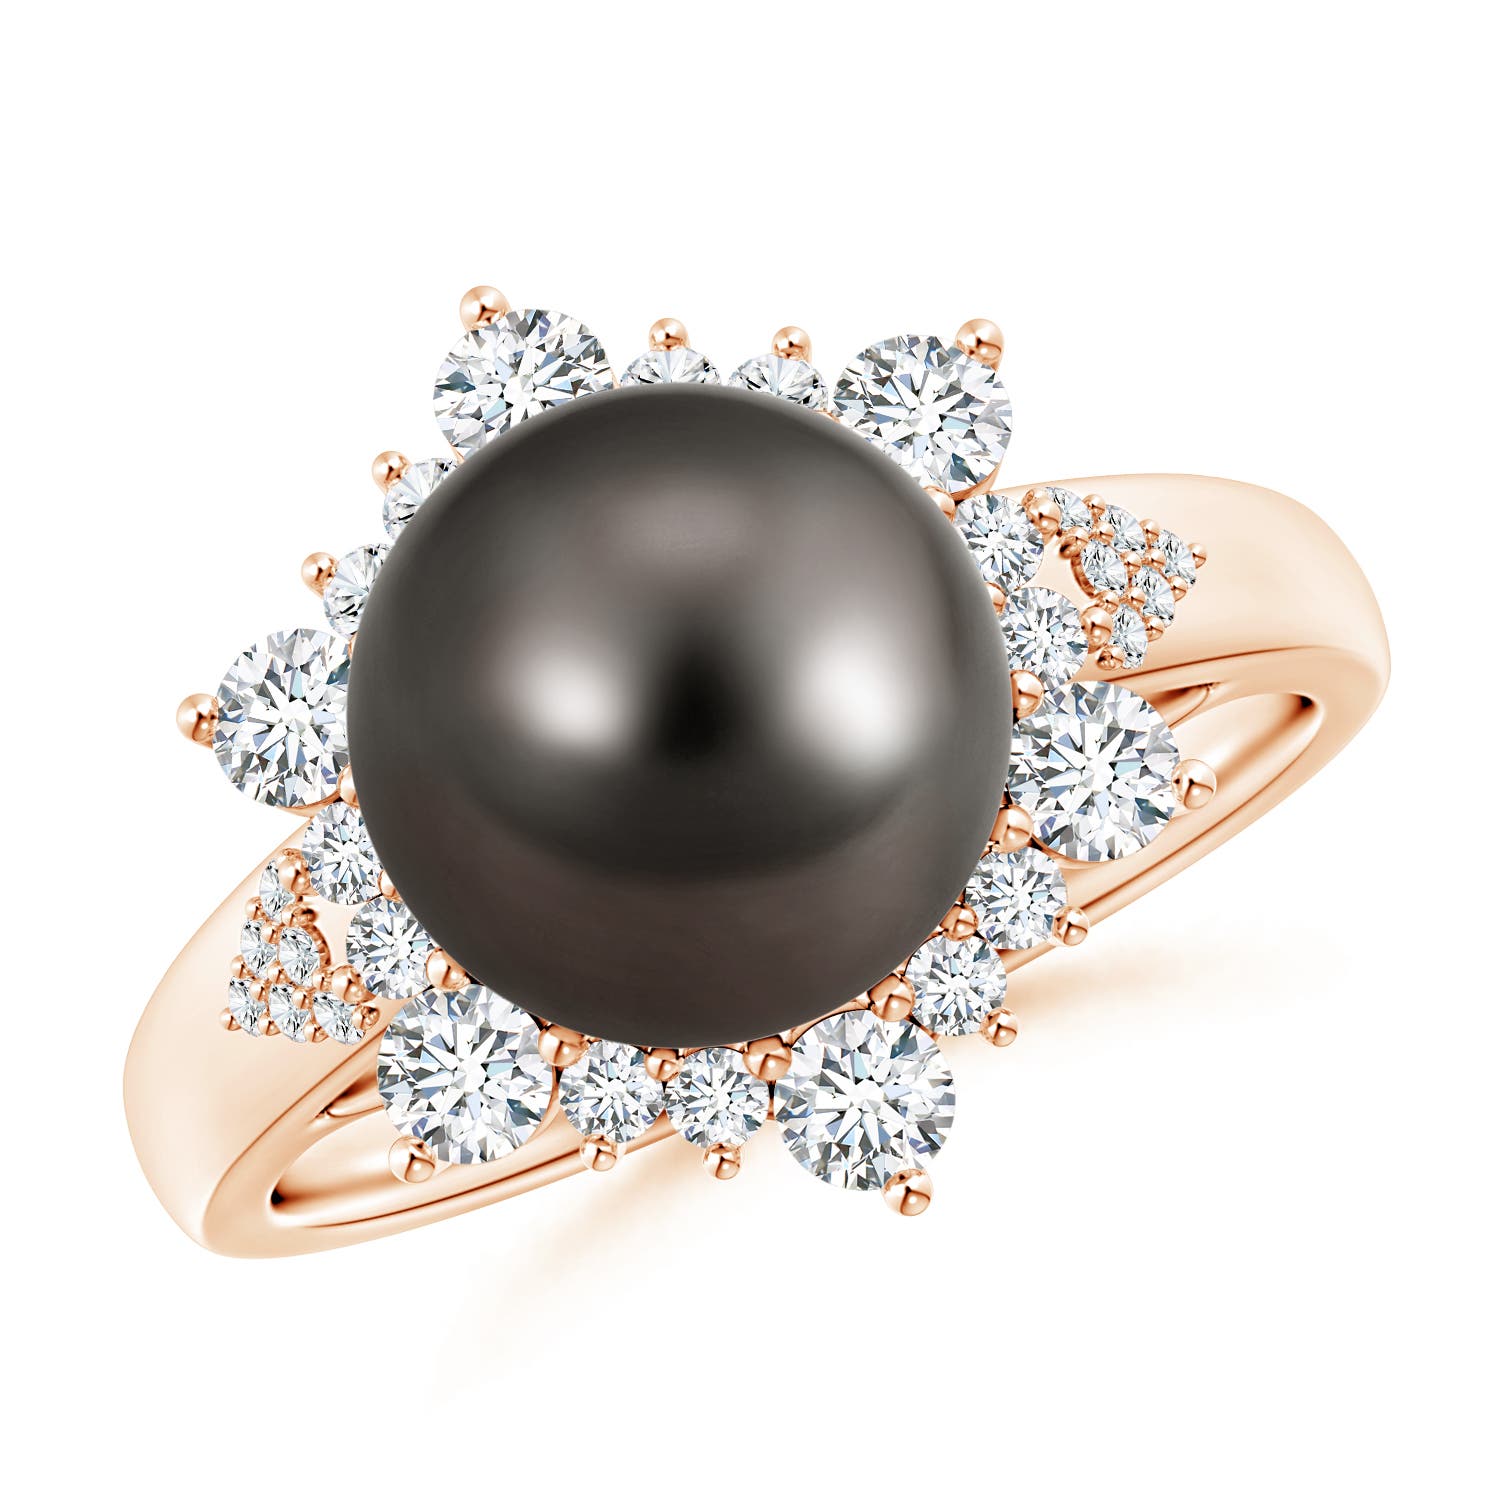 What Is the History and Origin of Tahitian Cultured Pearl?